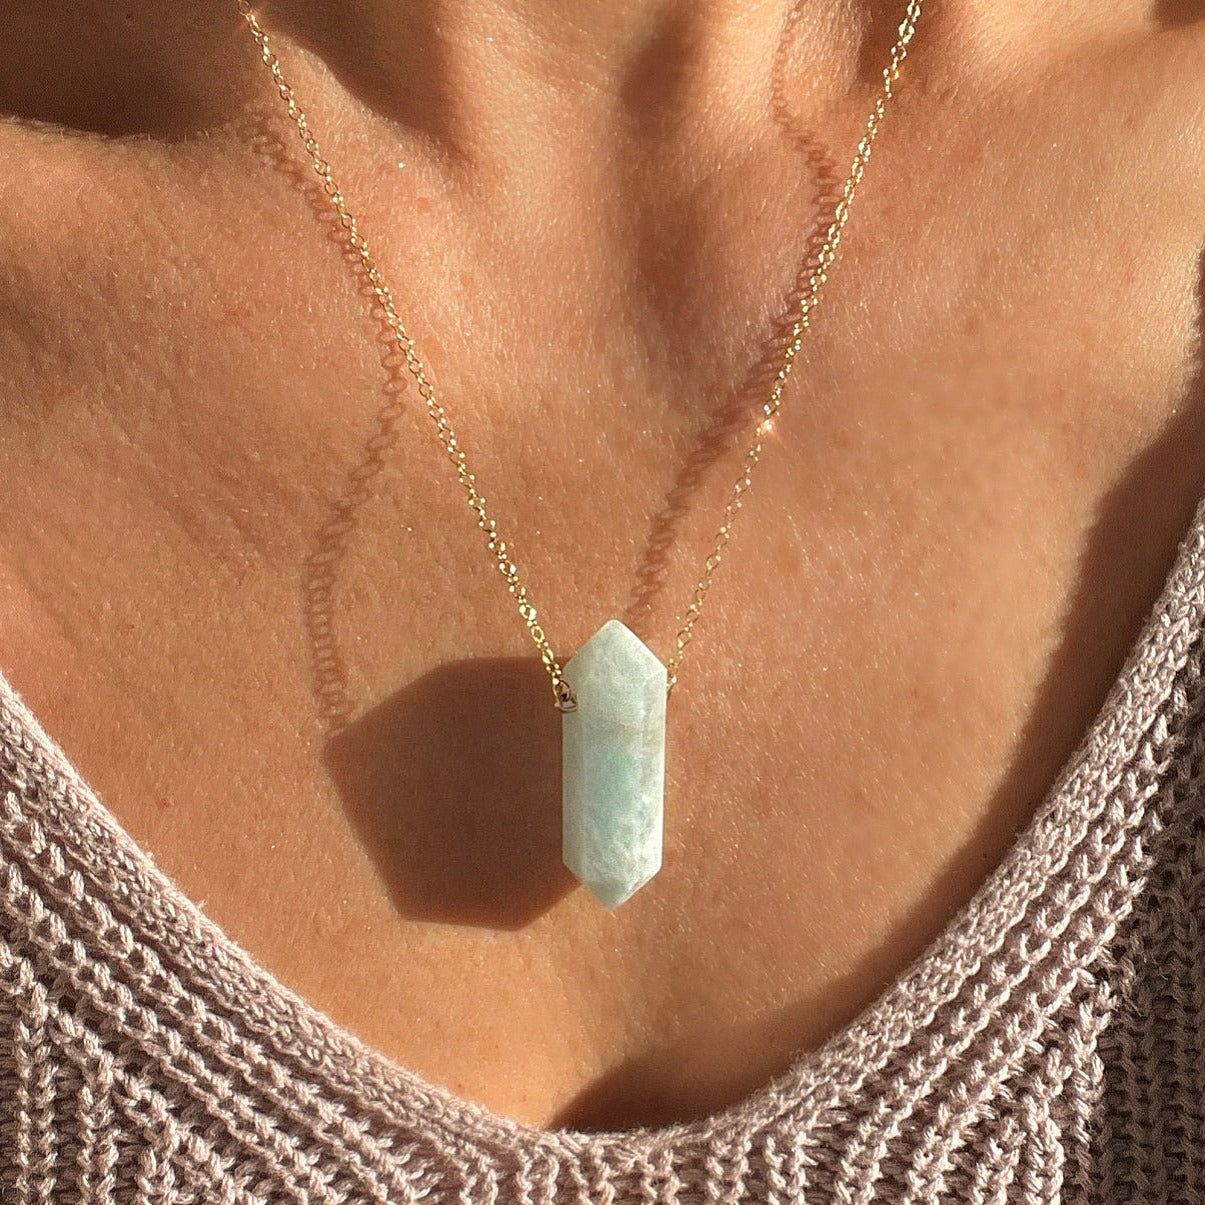 Aquamarine - A Beautiful and Subtle Gemstone to Add to Your Collection